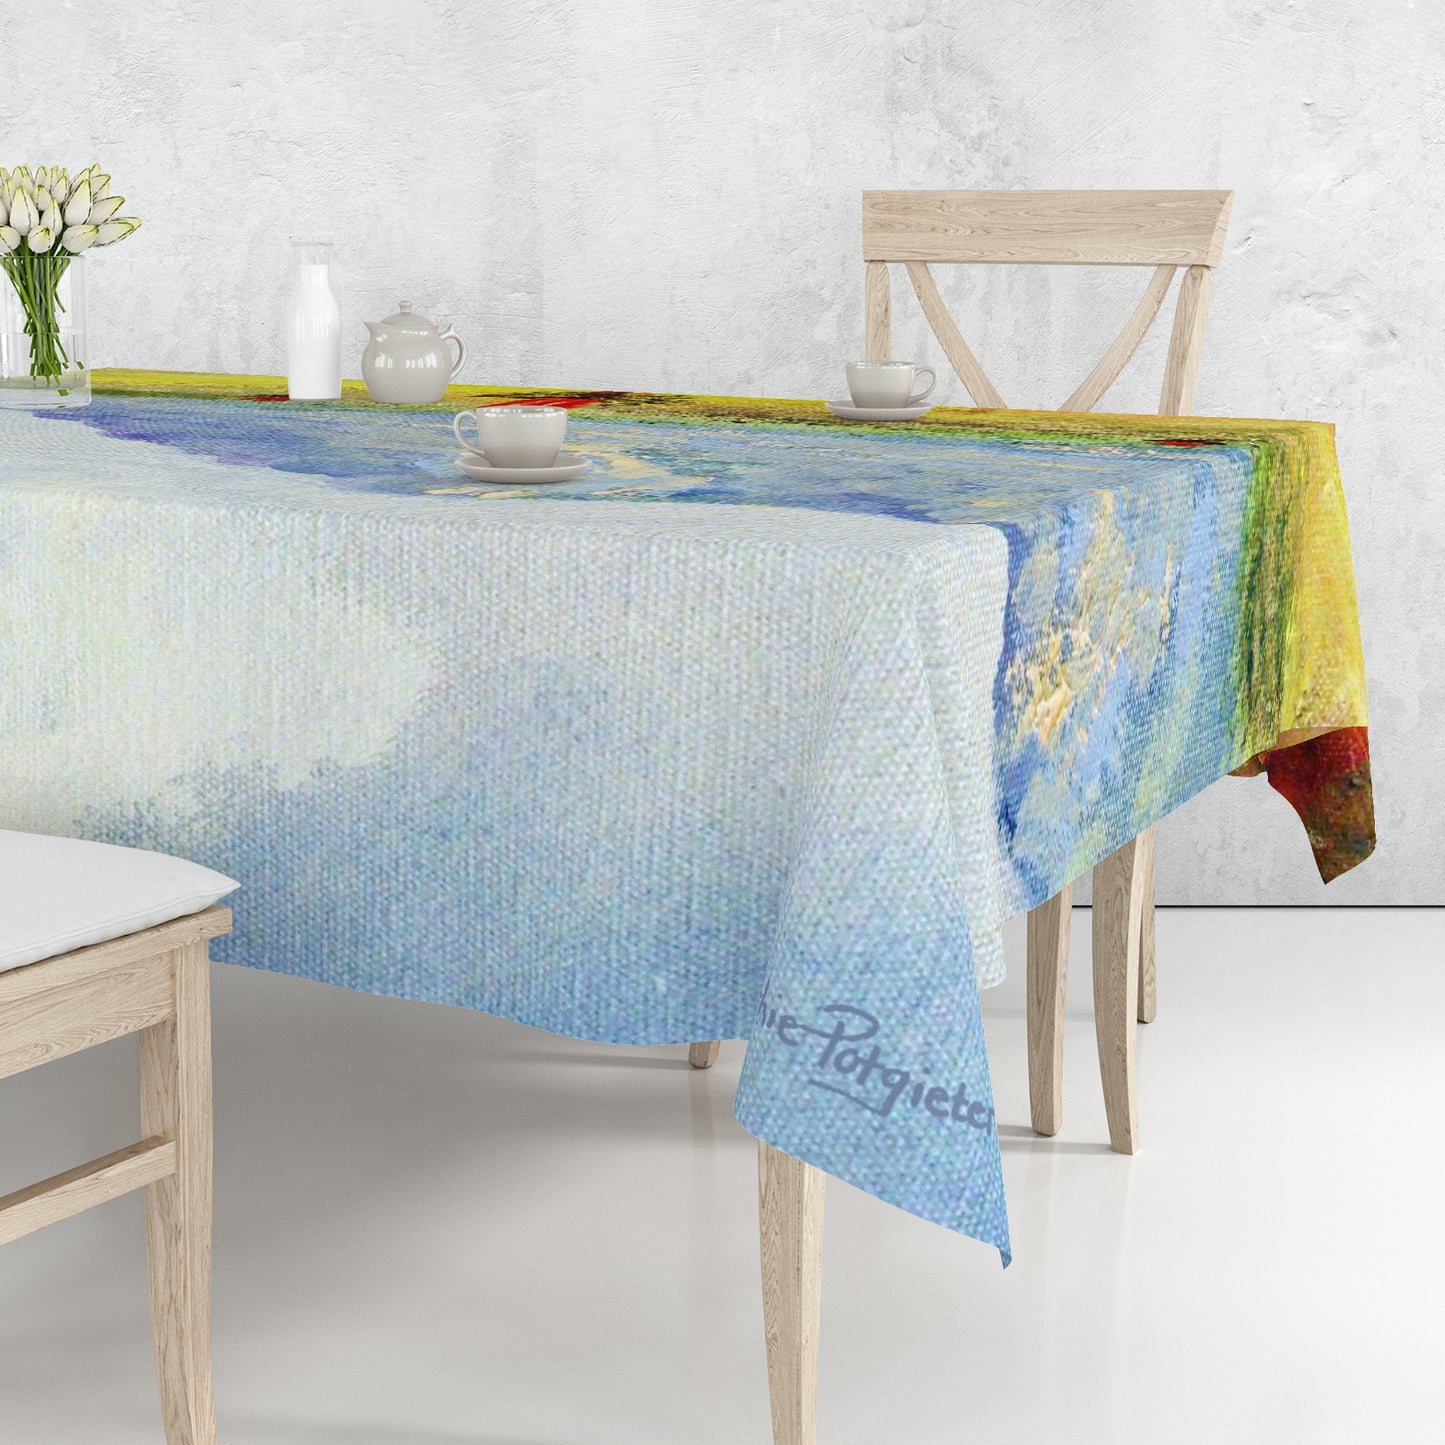 Aloe Mountain View By Marthie Potgieter Rectangle Tablecloth